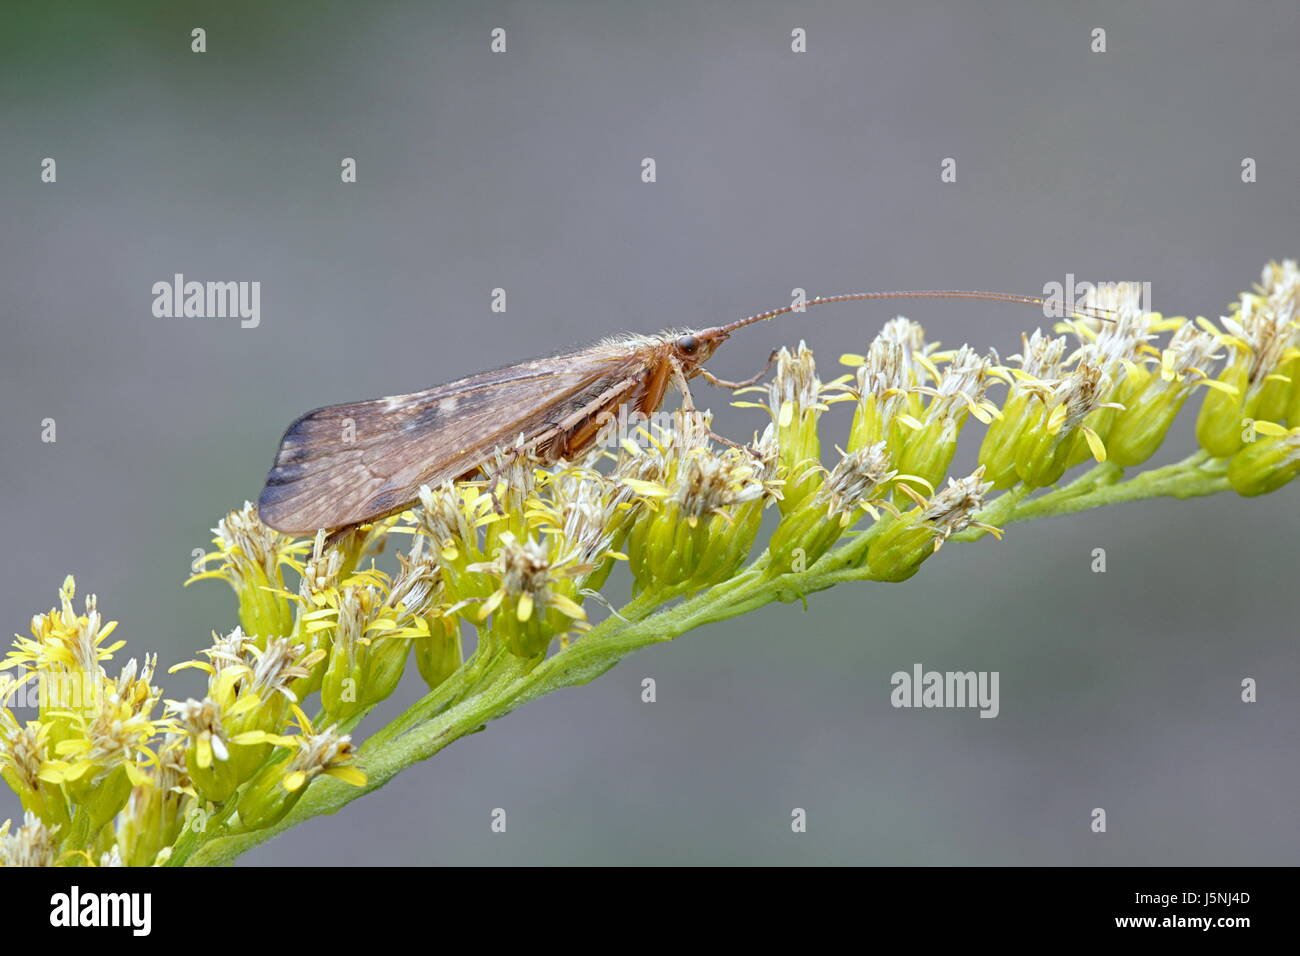 Caddisfly (Trichoptera sp) resting on flowers of Goldenrod Stock Photo